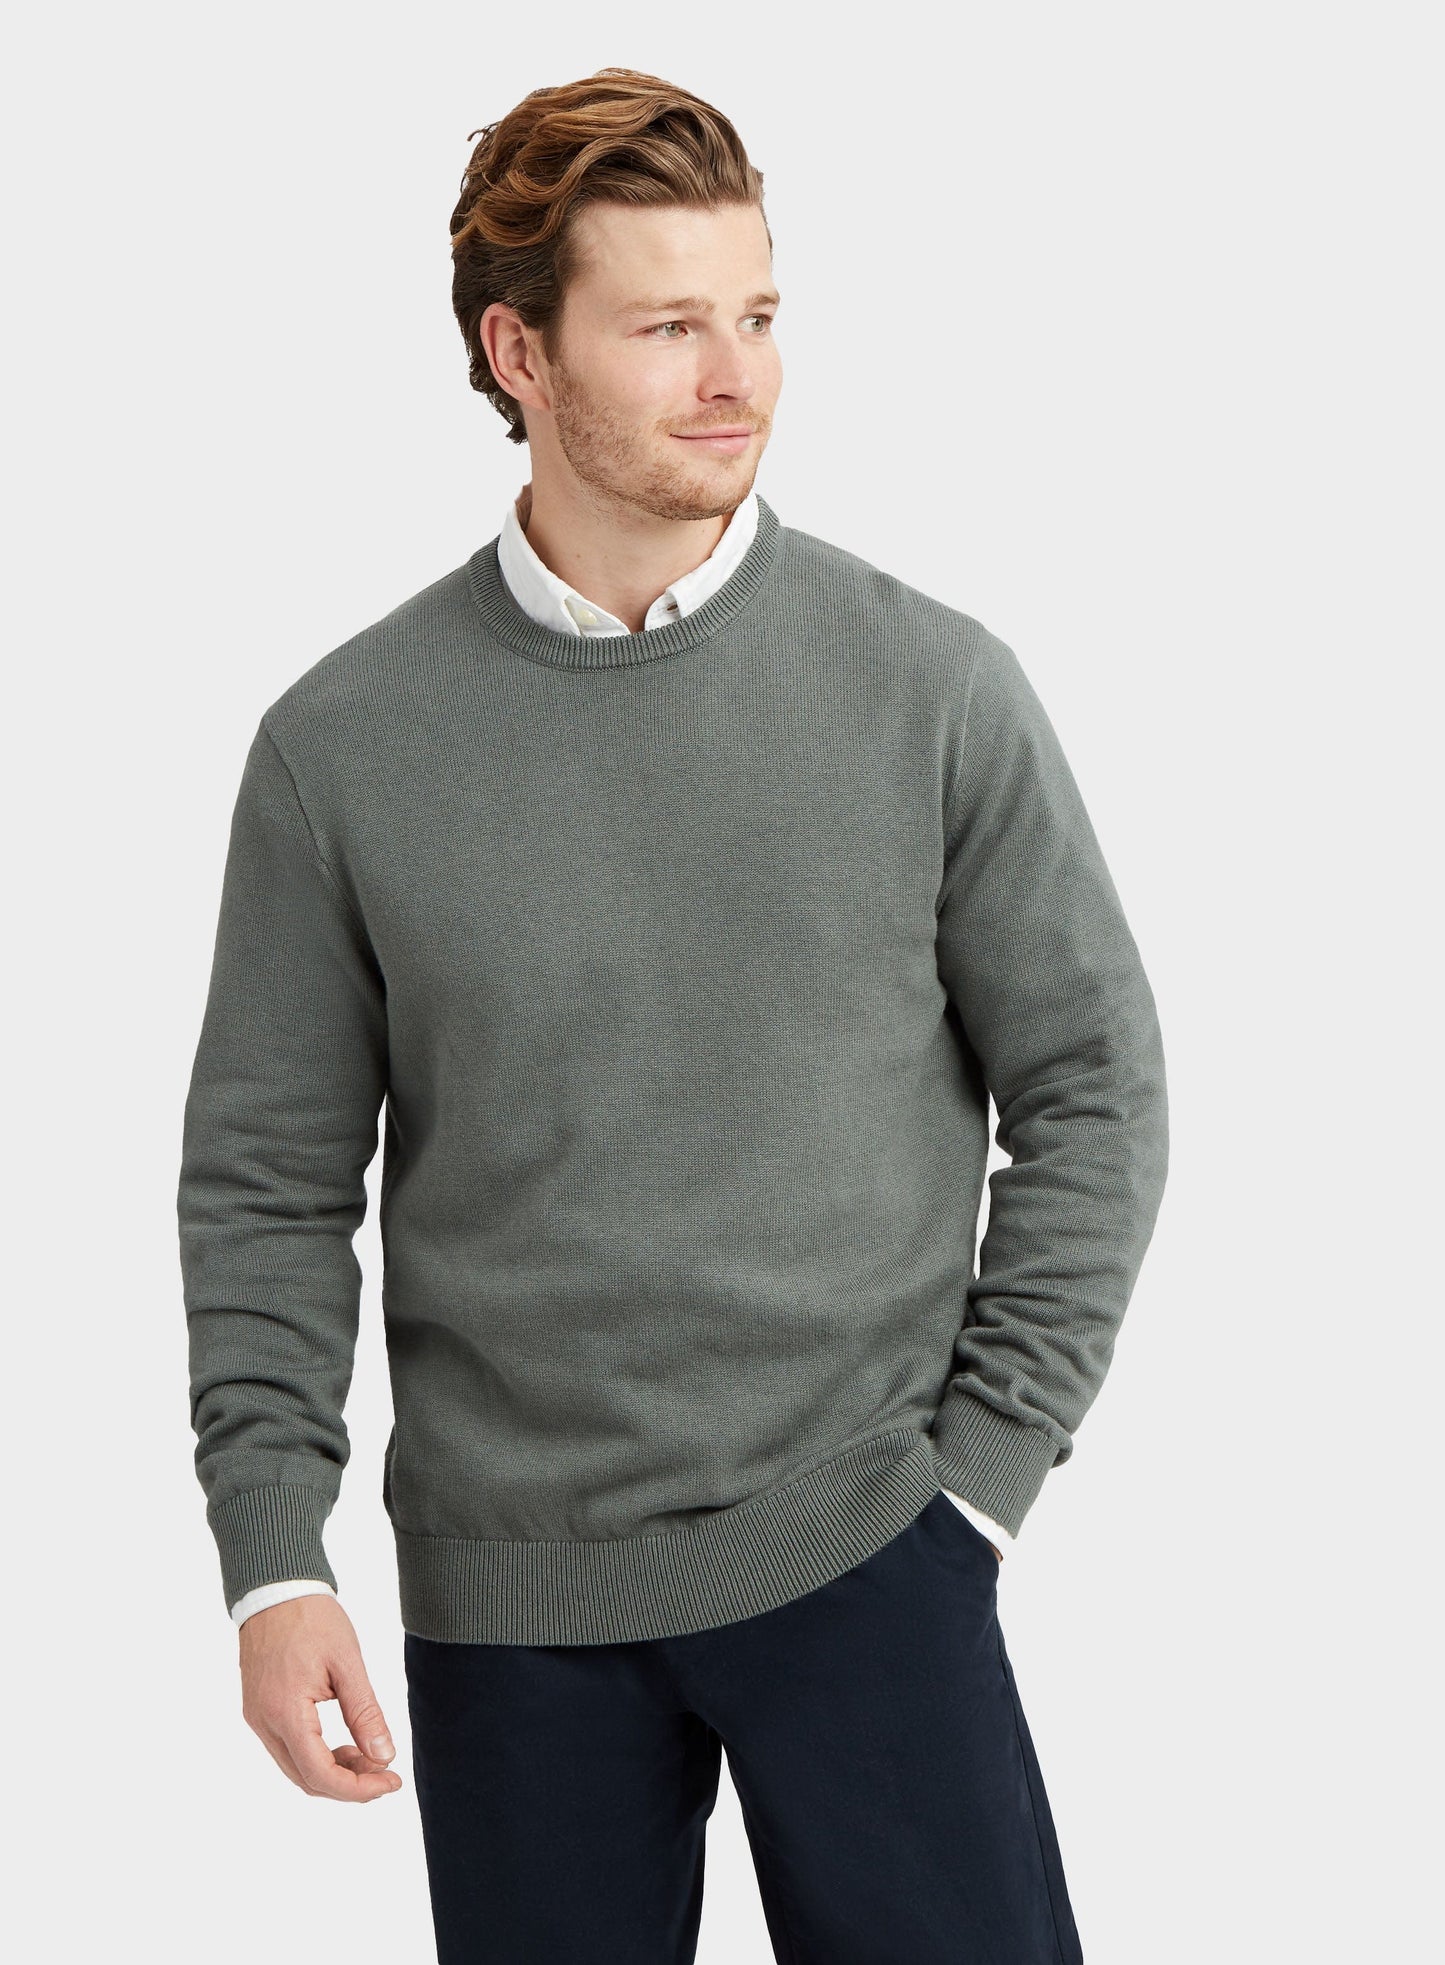 Cotton Cashmere Crew Neck in Moss